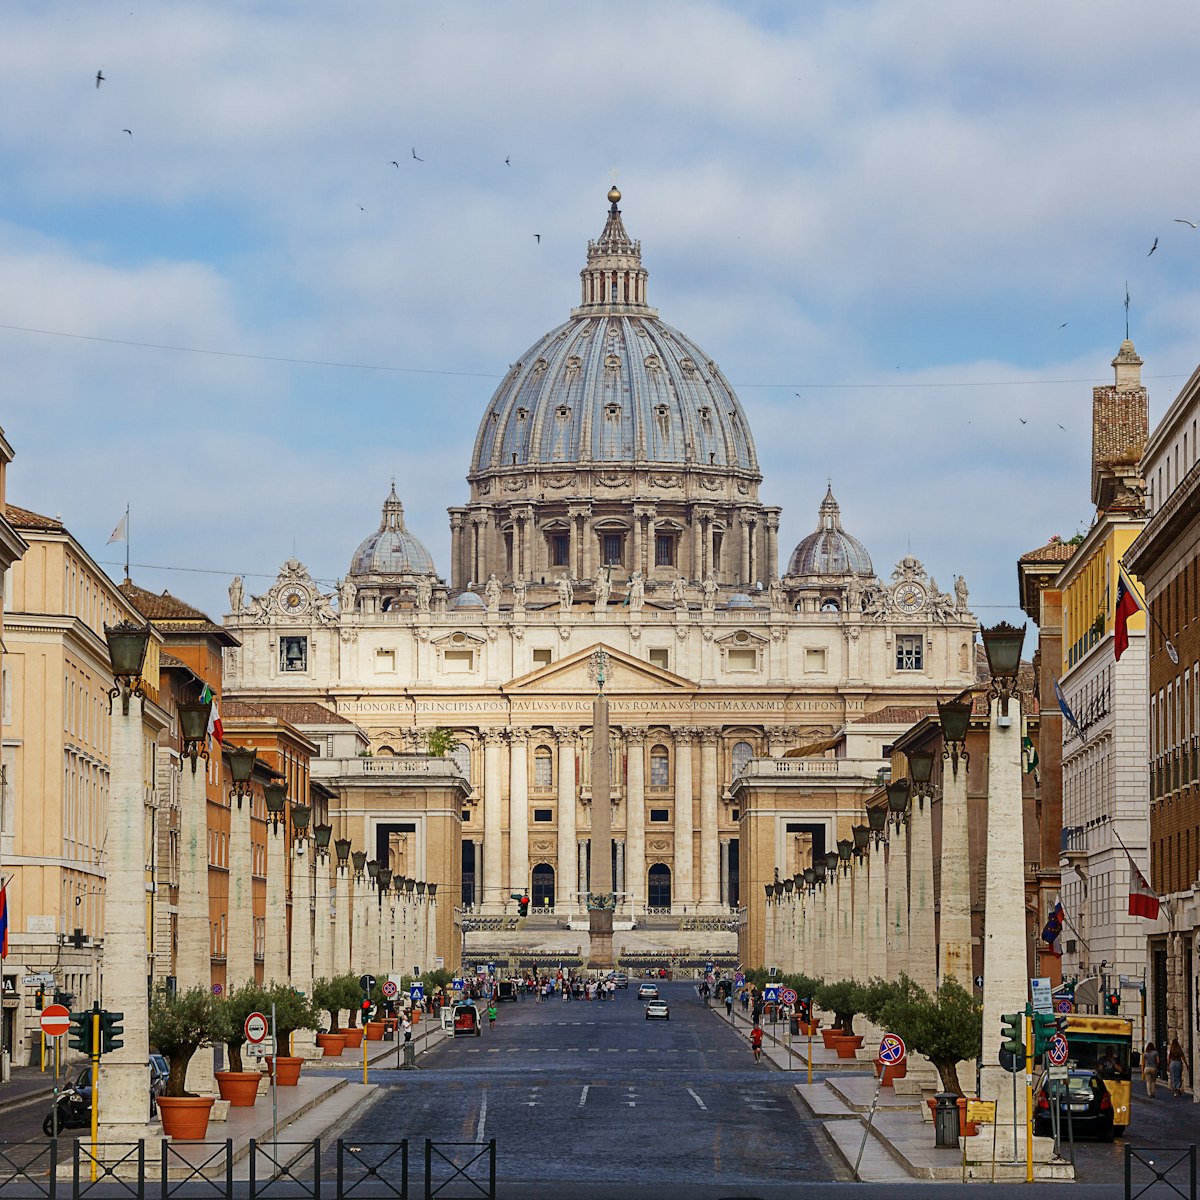 Basilica di San Pietro. Rome. Italy.
160245212
ancient, architecture, basilica, building, capital, cathedral, catholic, church, city, day, dome, egyptian, europe, exterior, facade, famous, front, heritage, historical, history, italian, italy, landmark, monument, obelisk, old, outdoor, peter, piazza, religion, roma, roman, rome, saint, san pietro, sightseeing, sky, square, st peter, street, touristic, travel, urban, vatican, view